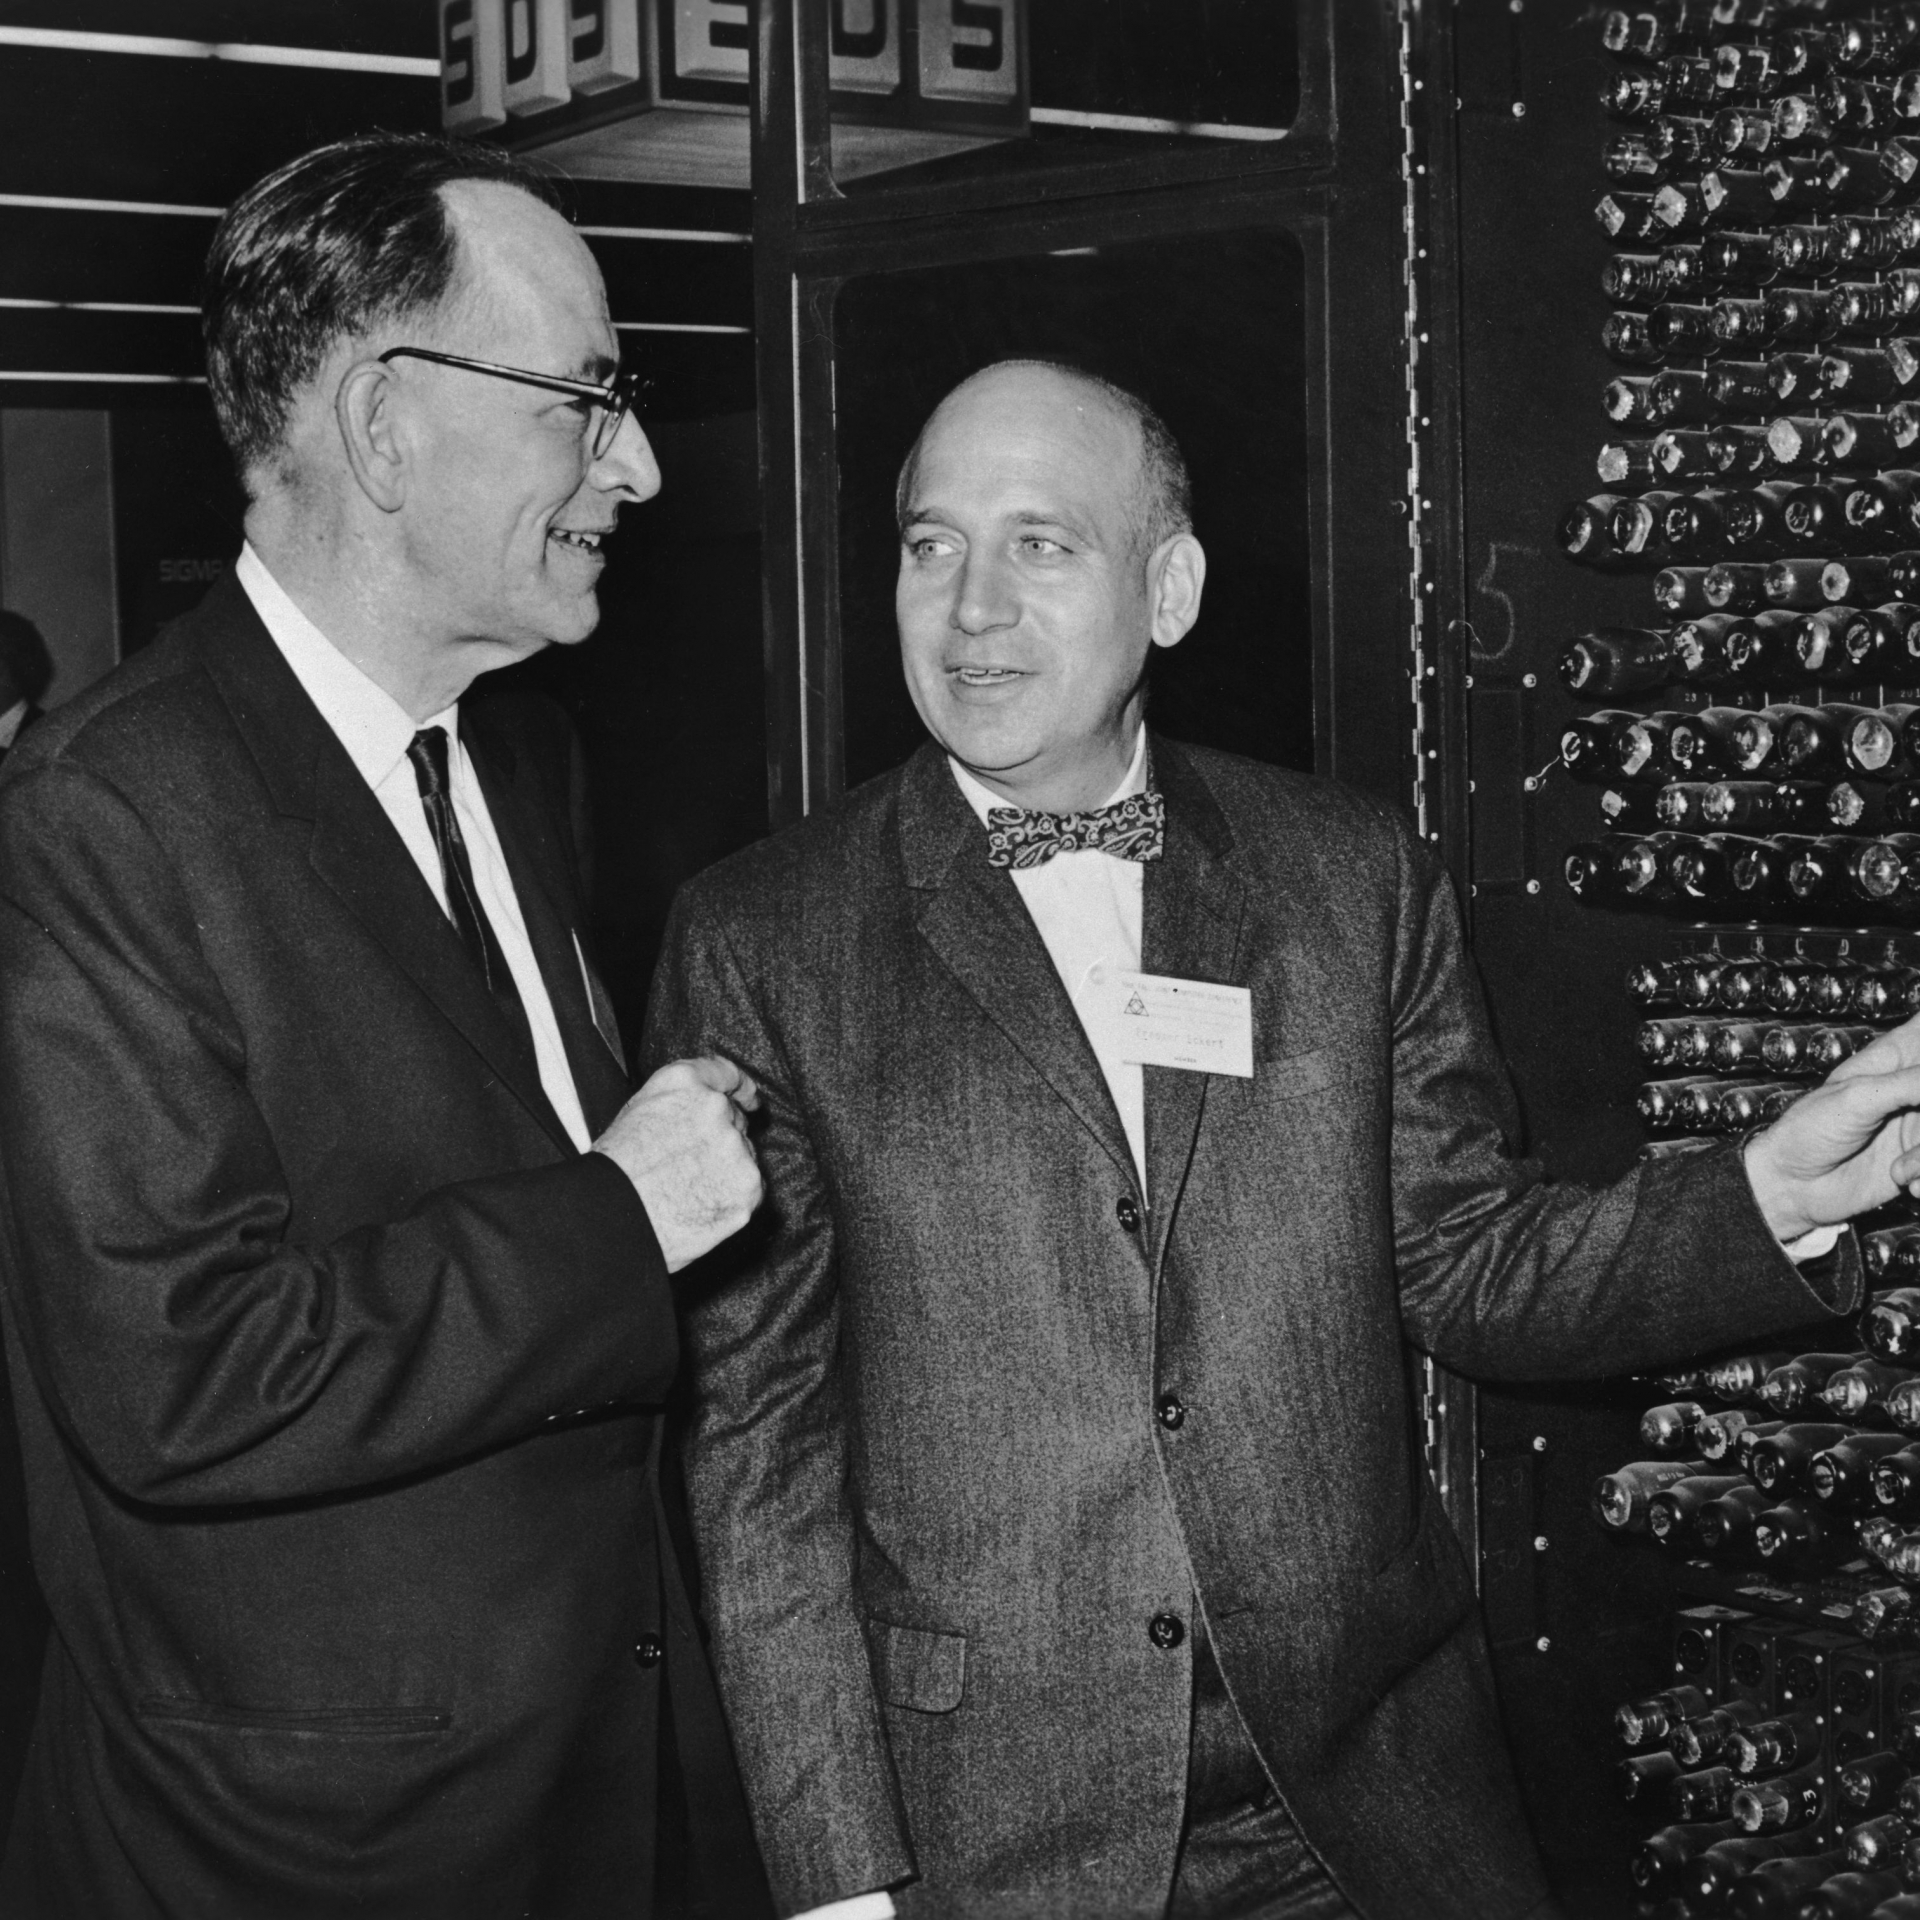 What is the first computer ever made in history?